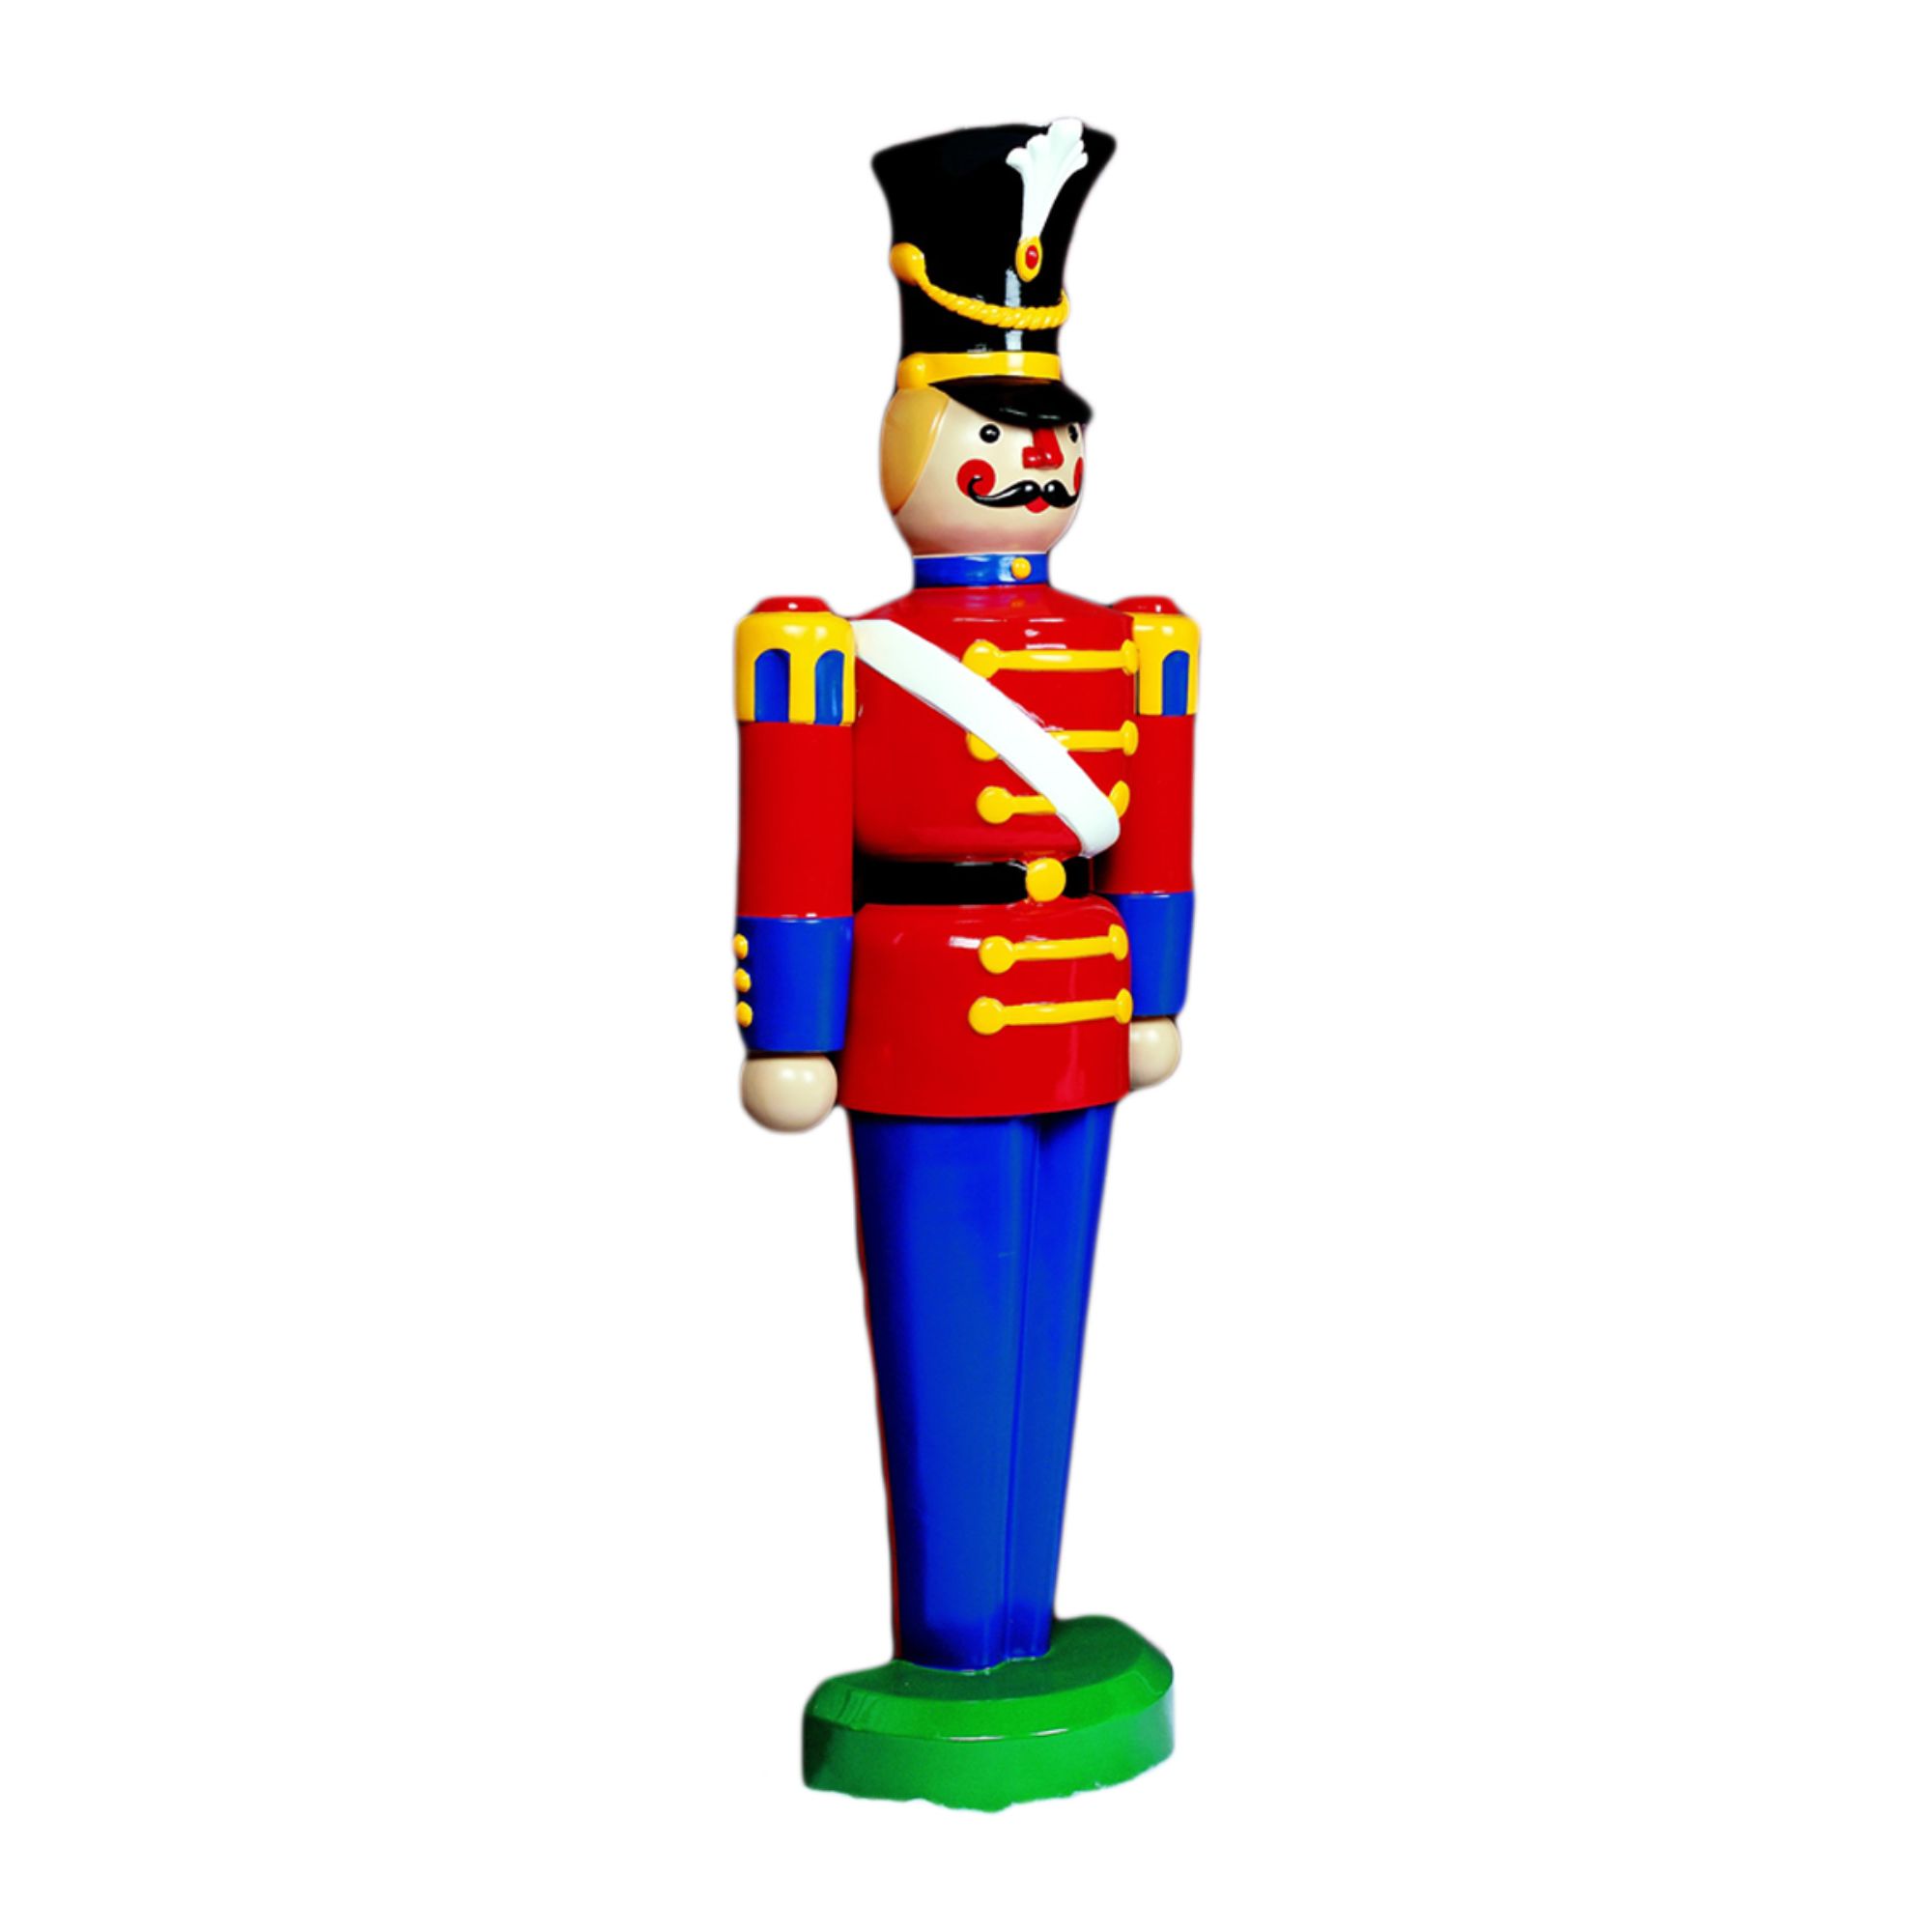 Barcana Life Size Soldier Half Toy Commercial Christmas Decor - 6.25' - Red and Blue